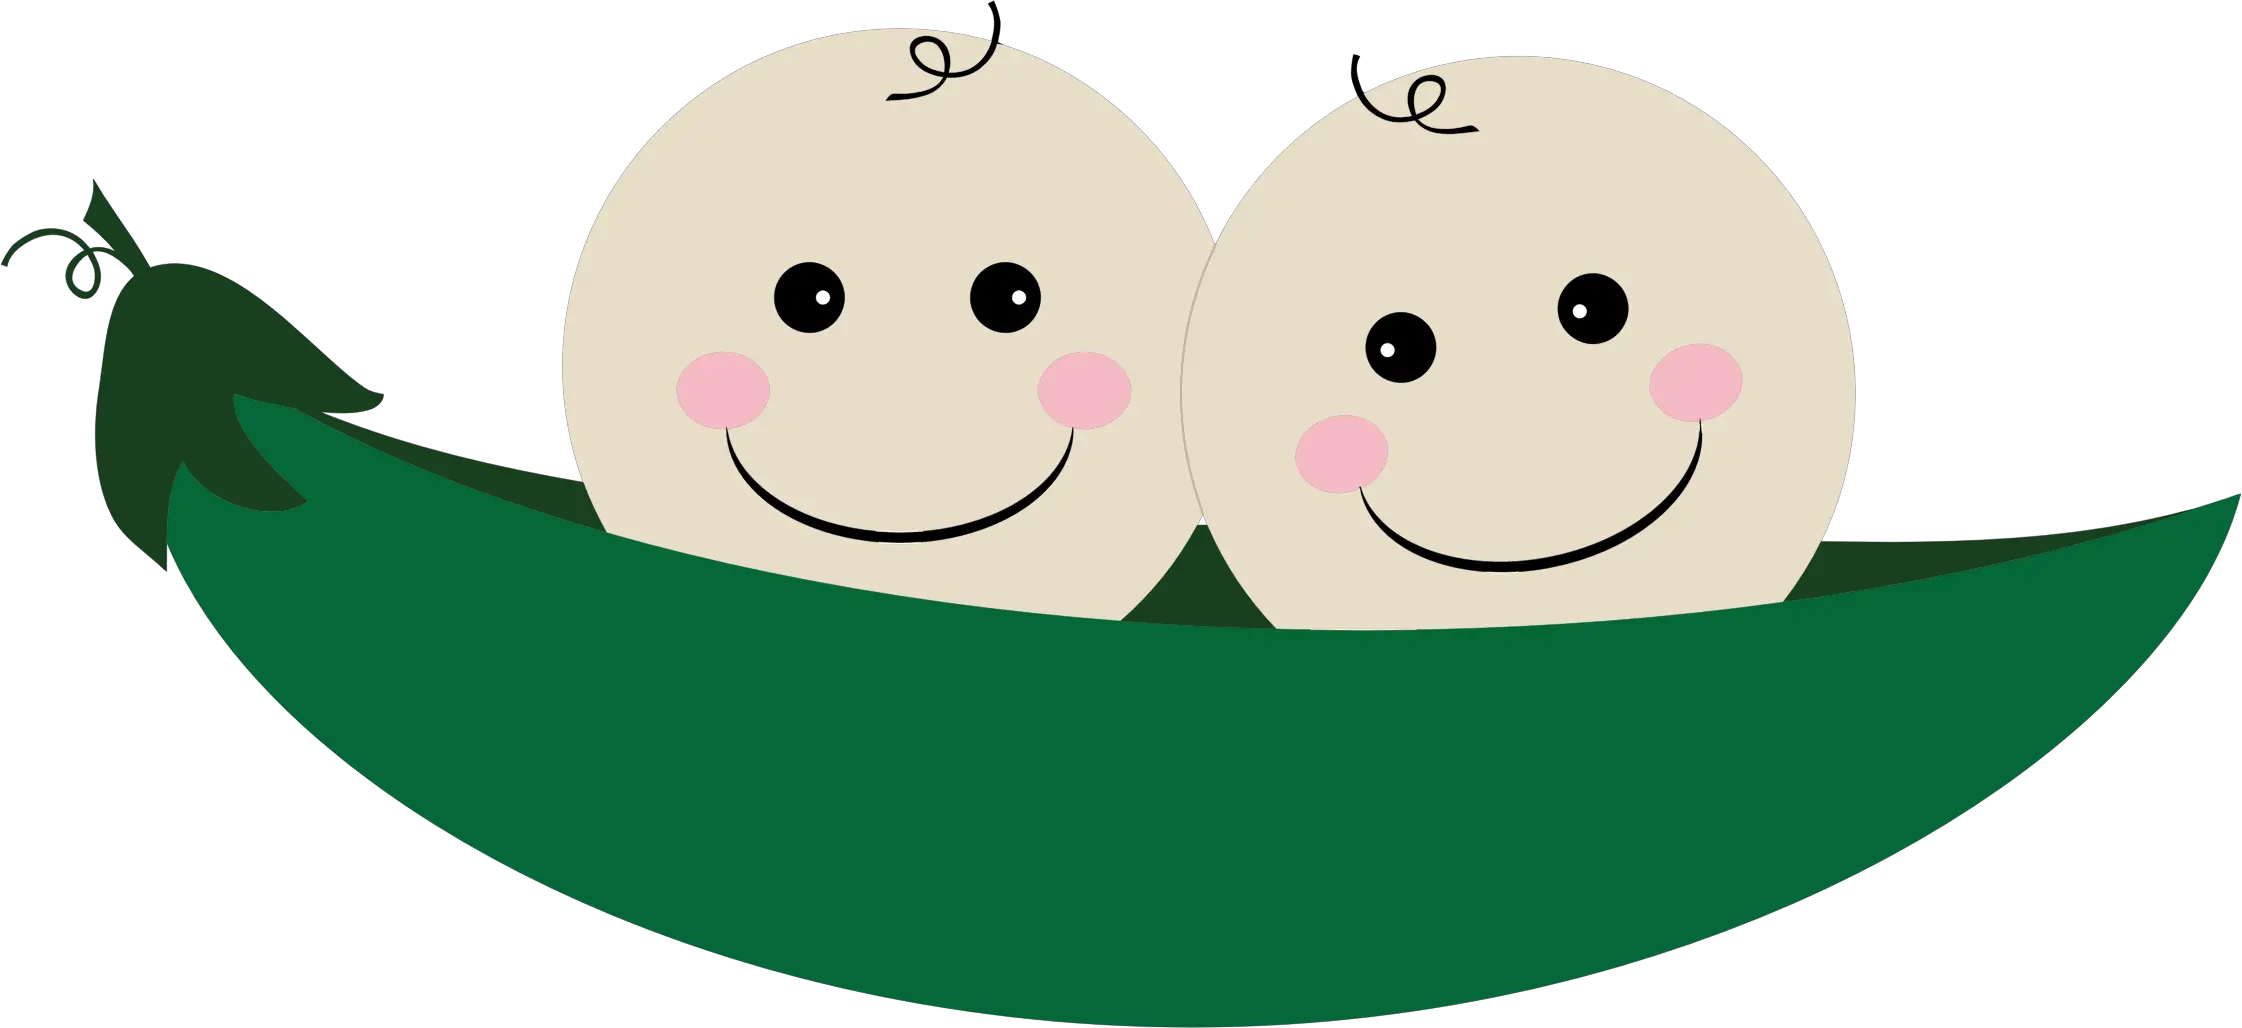 Png Twins Two Peas In A Pod Pea Two Peas In A Pod Twins Peas Png